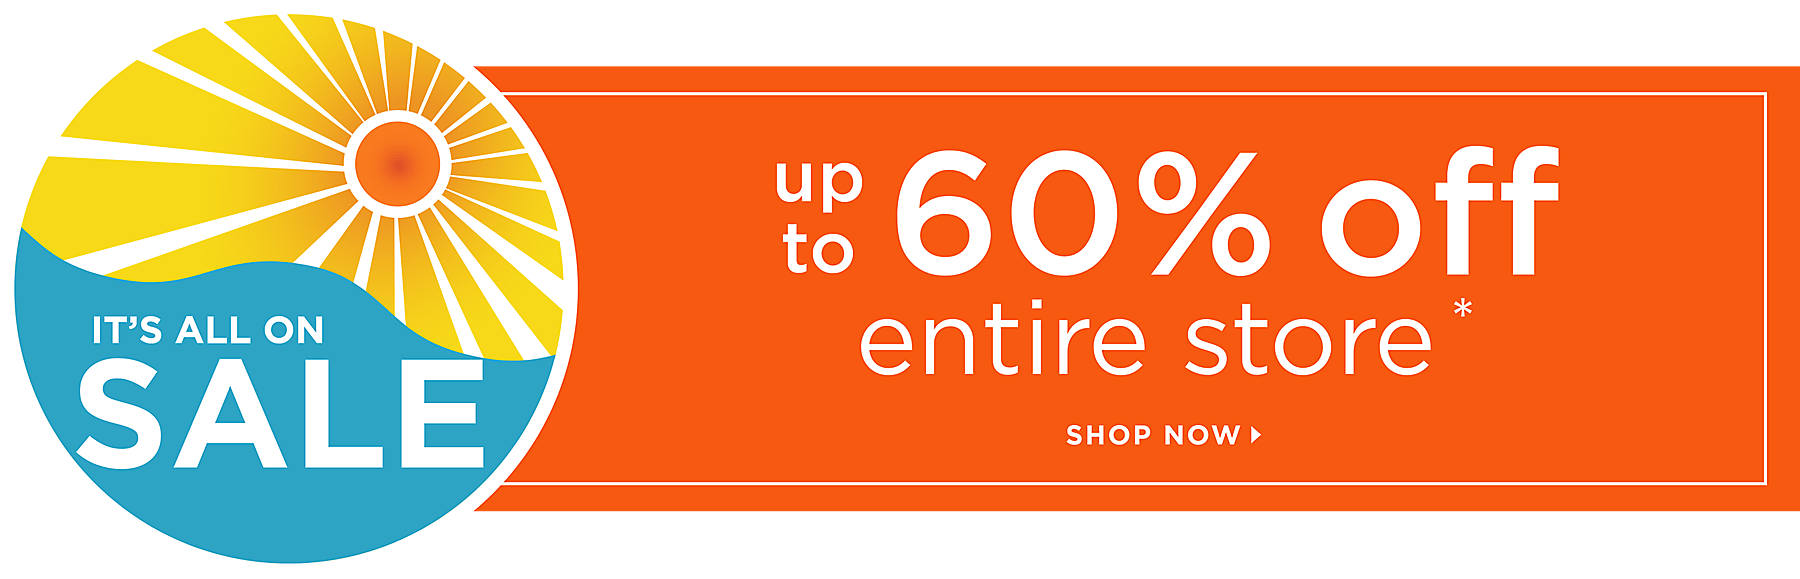 It's All On Sale Up to 60% Off entire store* Shop Now